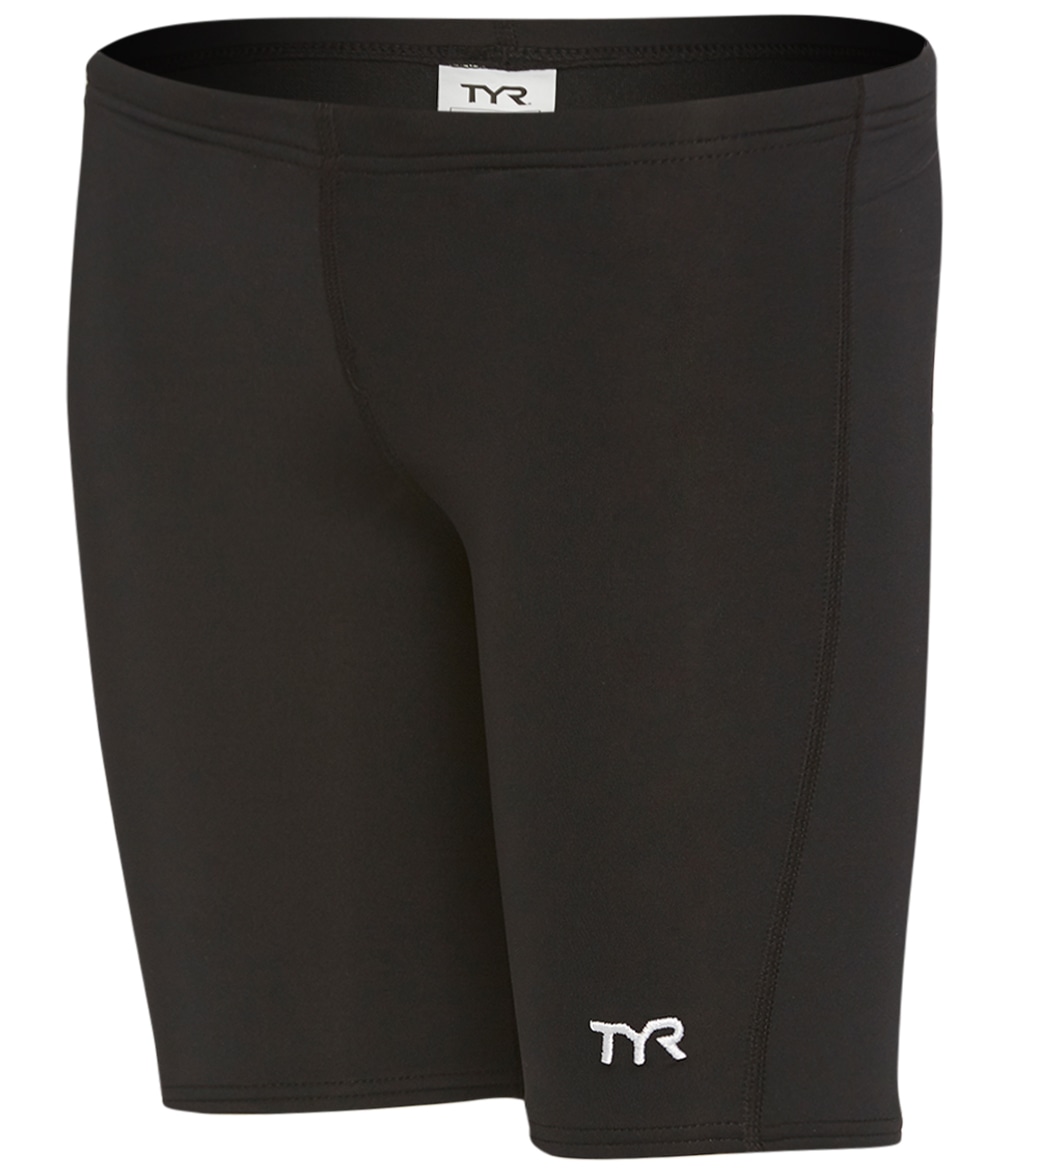 TYR Boys' Solid Jammer Swimsuit - Black Large 12/14 Polyester/Spandex - Swimoutlet.com